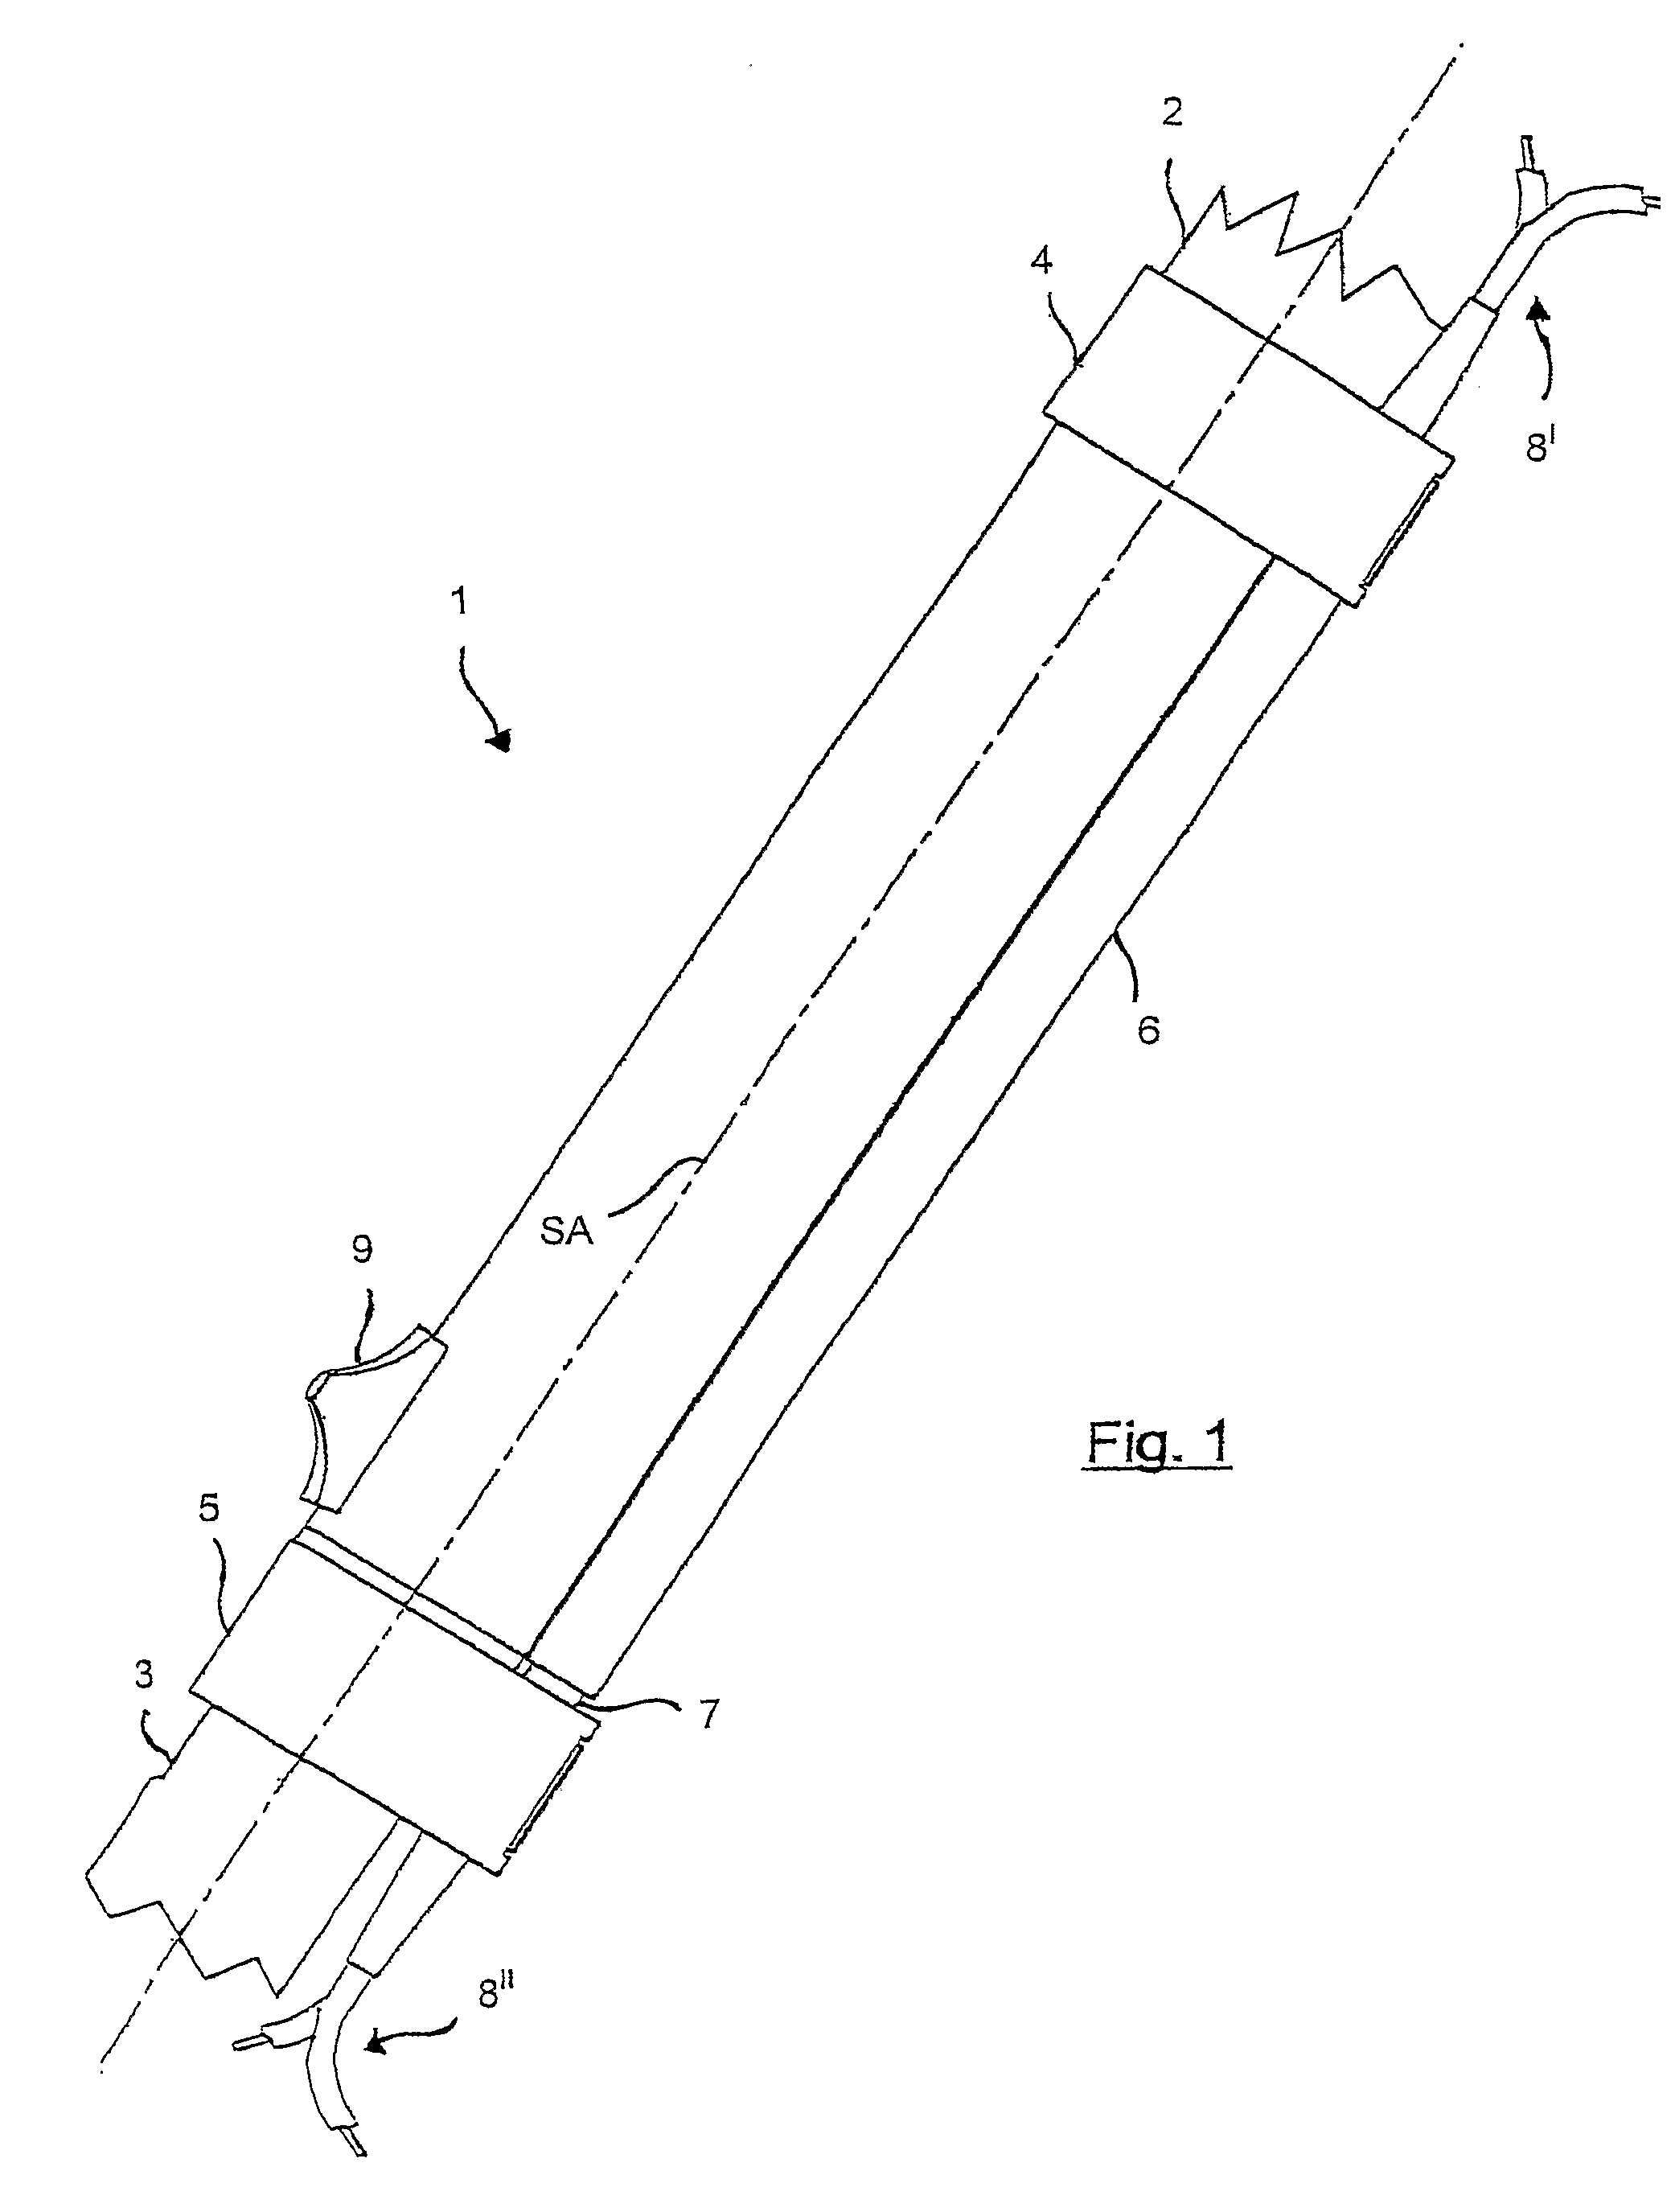 Telescopic tube for electric household appliances equipped with electricity conduction means